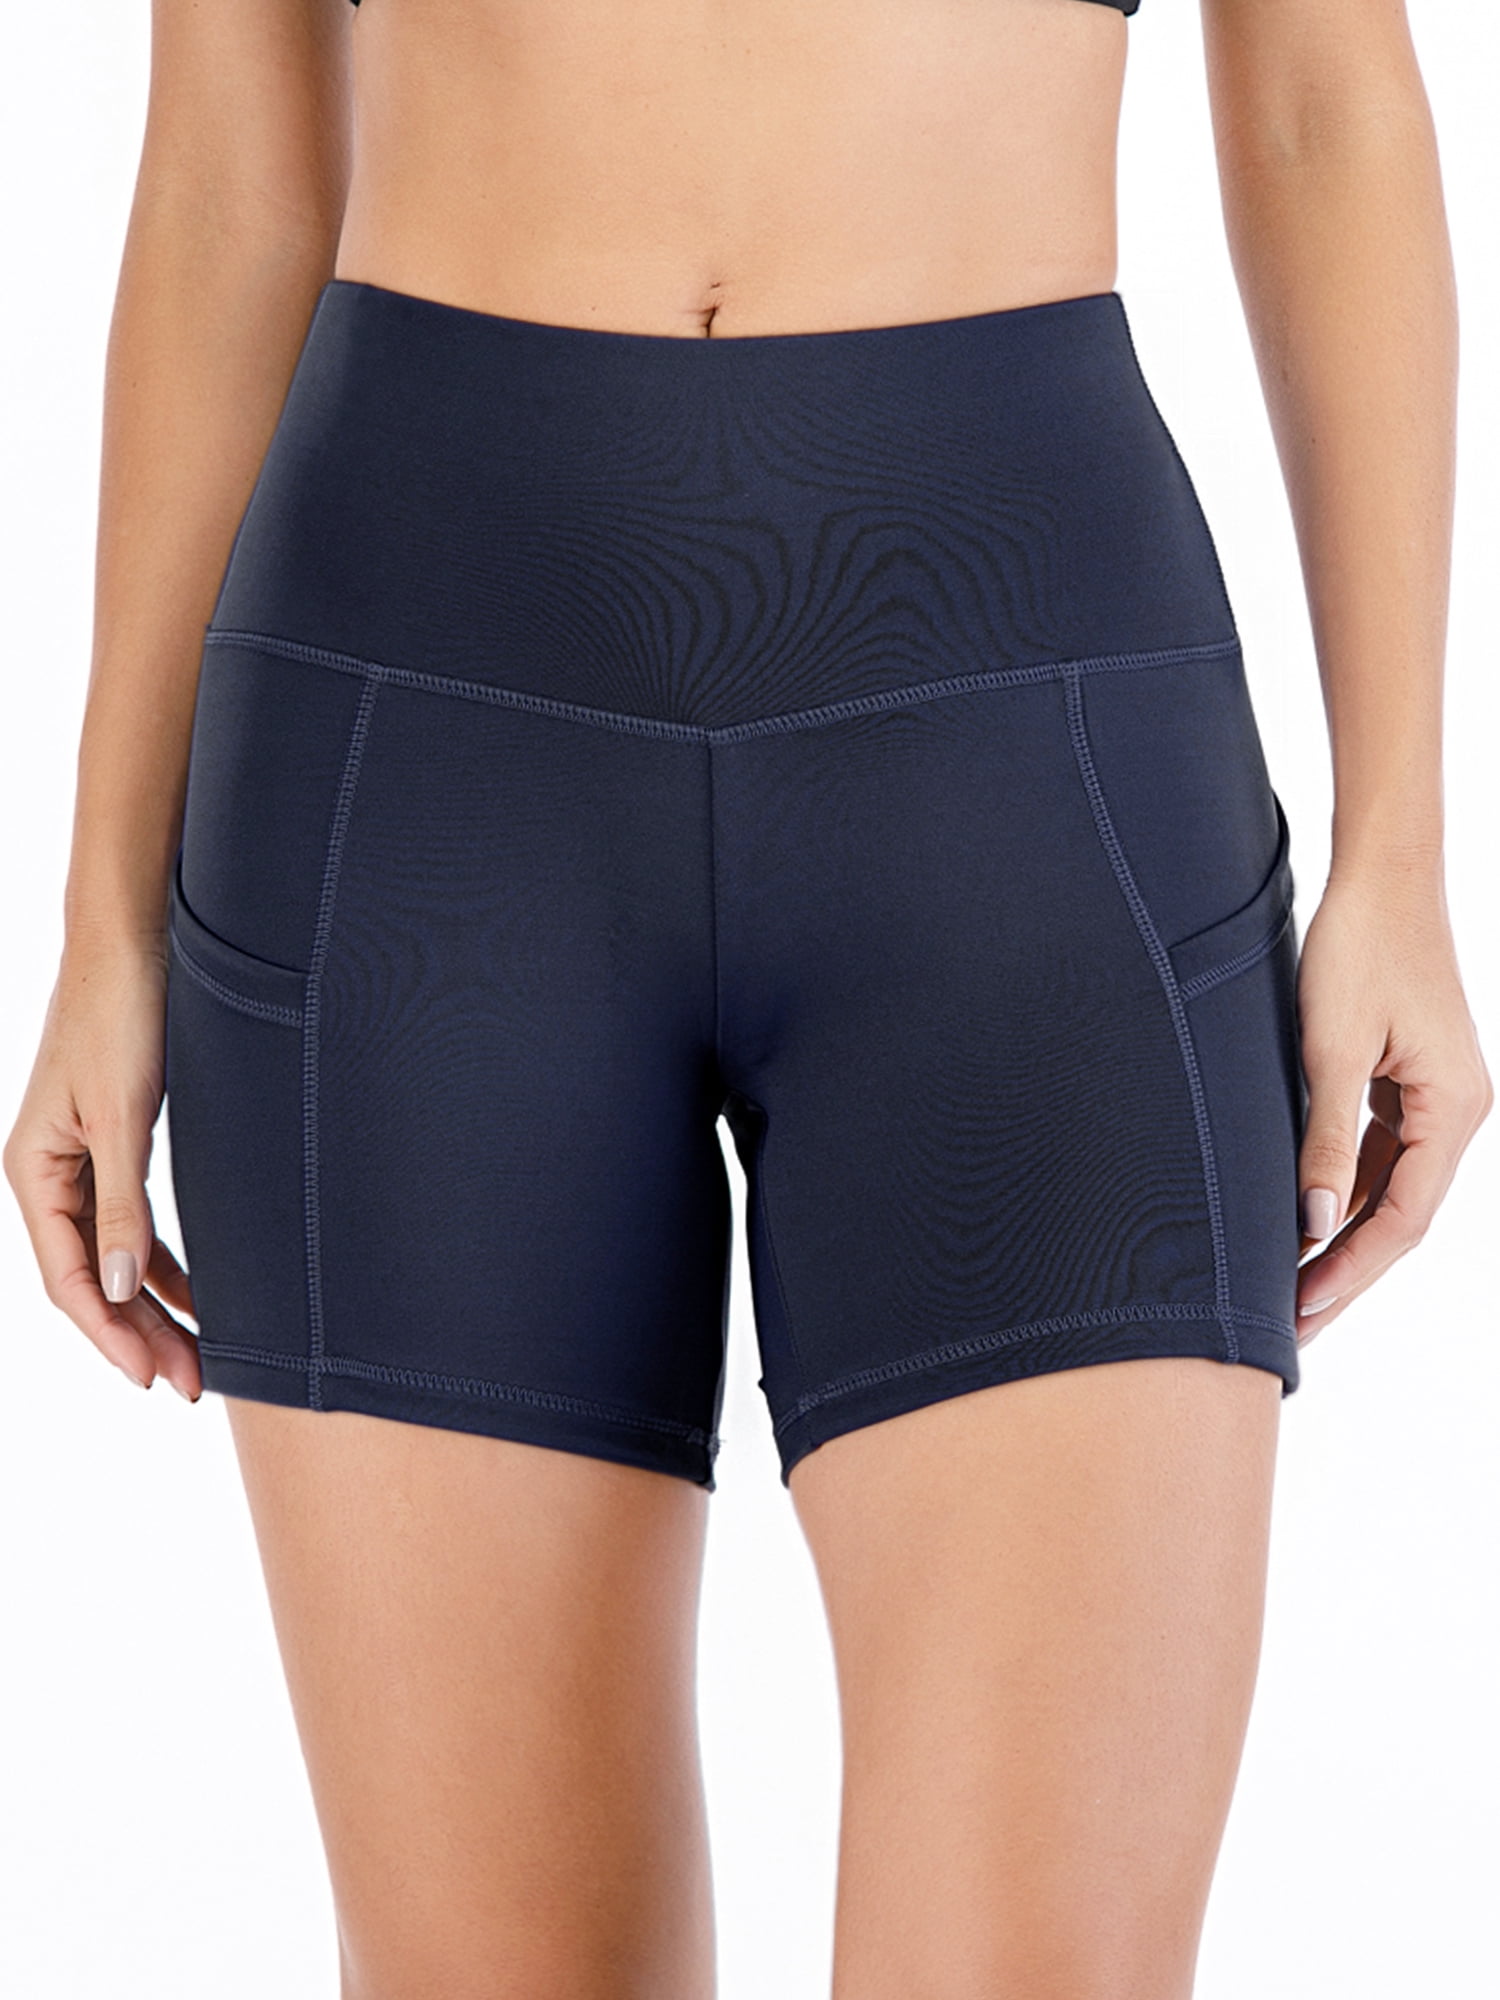 Yoga Shorts for Women High Waist Out Pocket Yoga Short Tummy Control Workout Running Athletic Non See-Through Yoga Short 